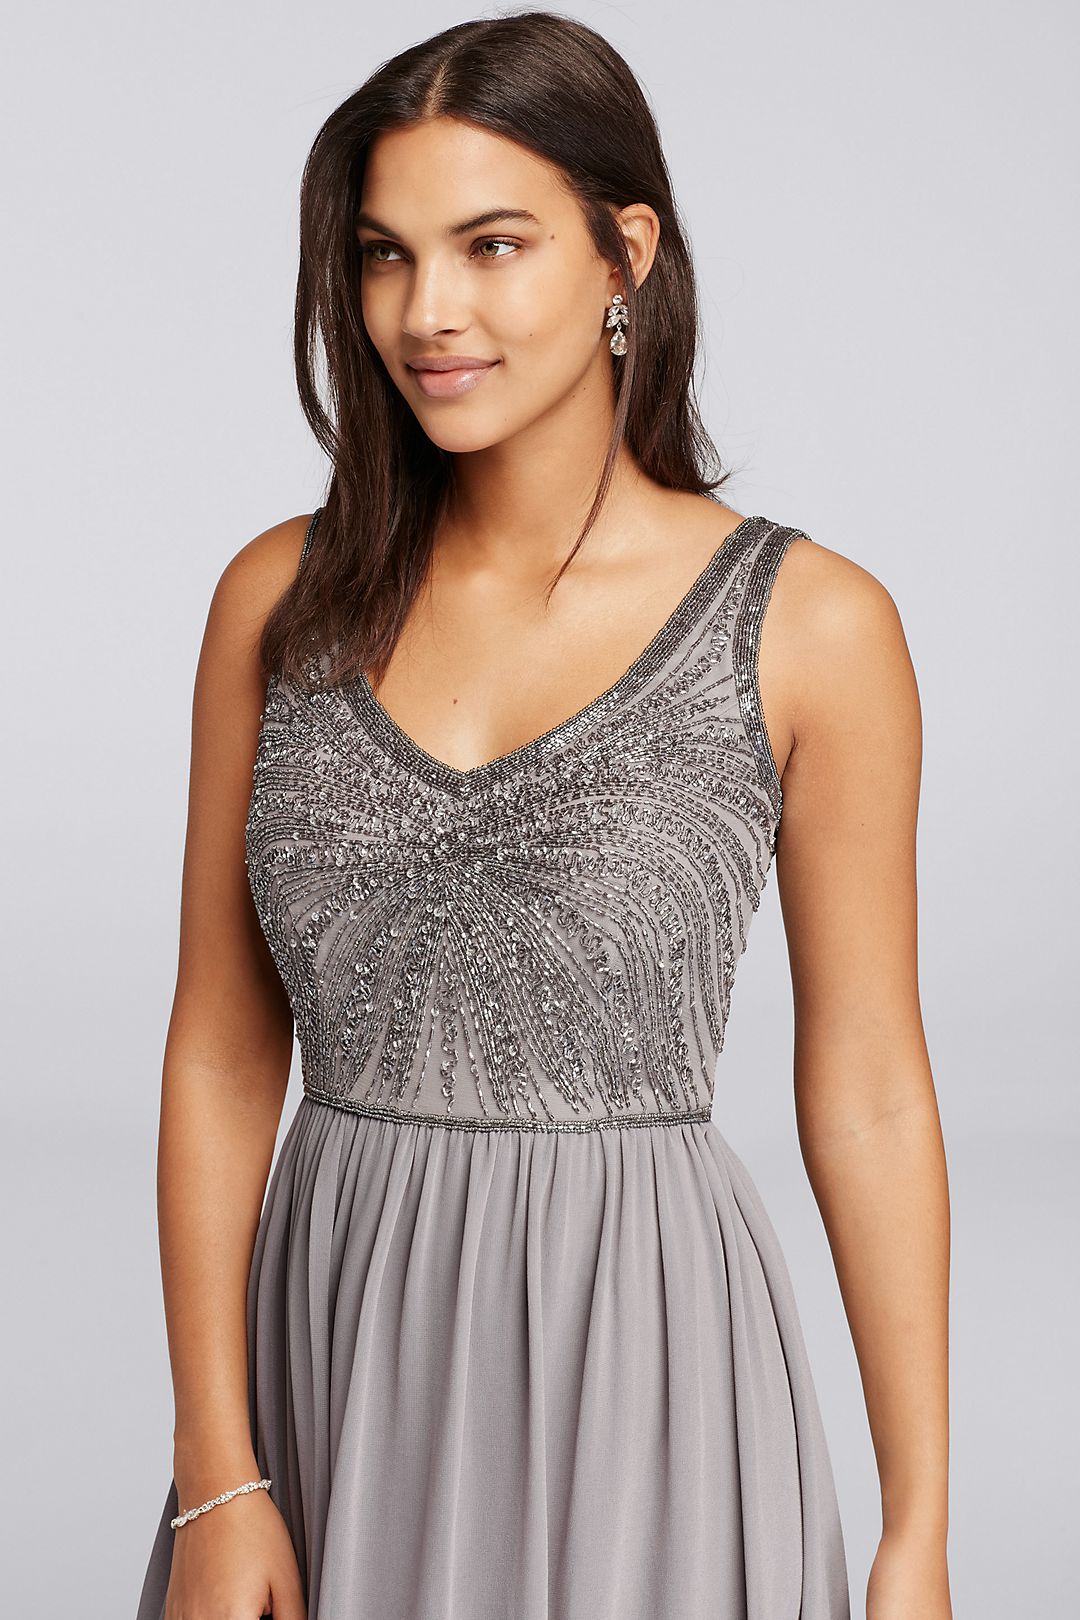 Long Dress with V-Neckline and Beaded Bodice Image 4